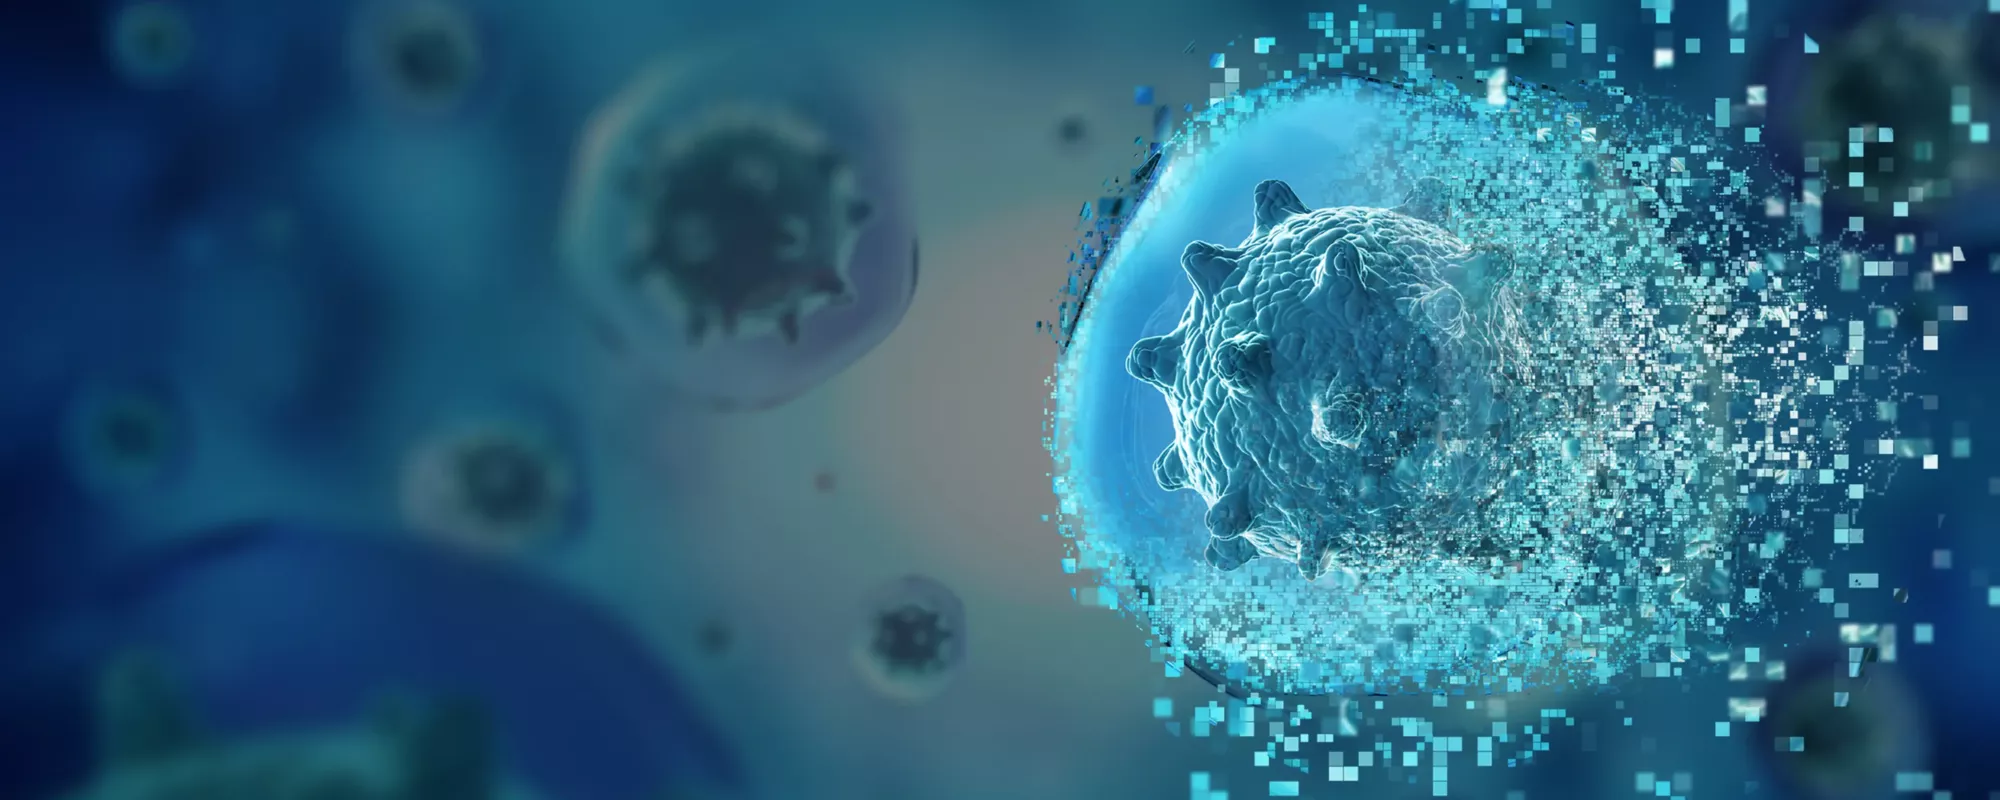 Pixelated cell - Investigate the genetic potential of complex microbiomes.